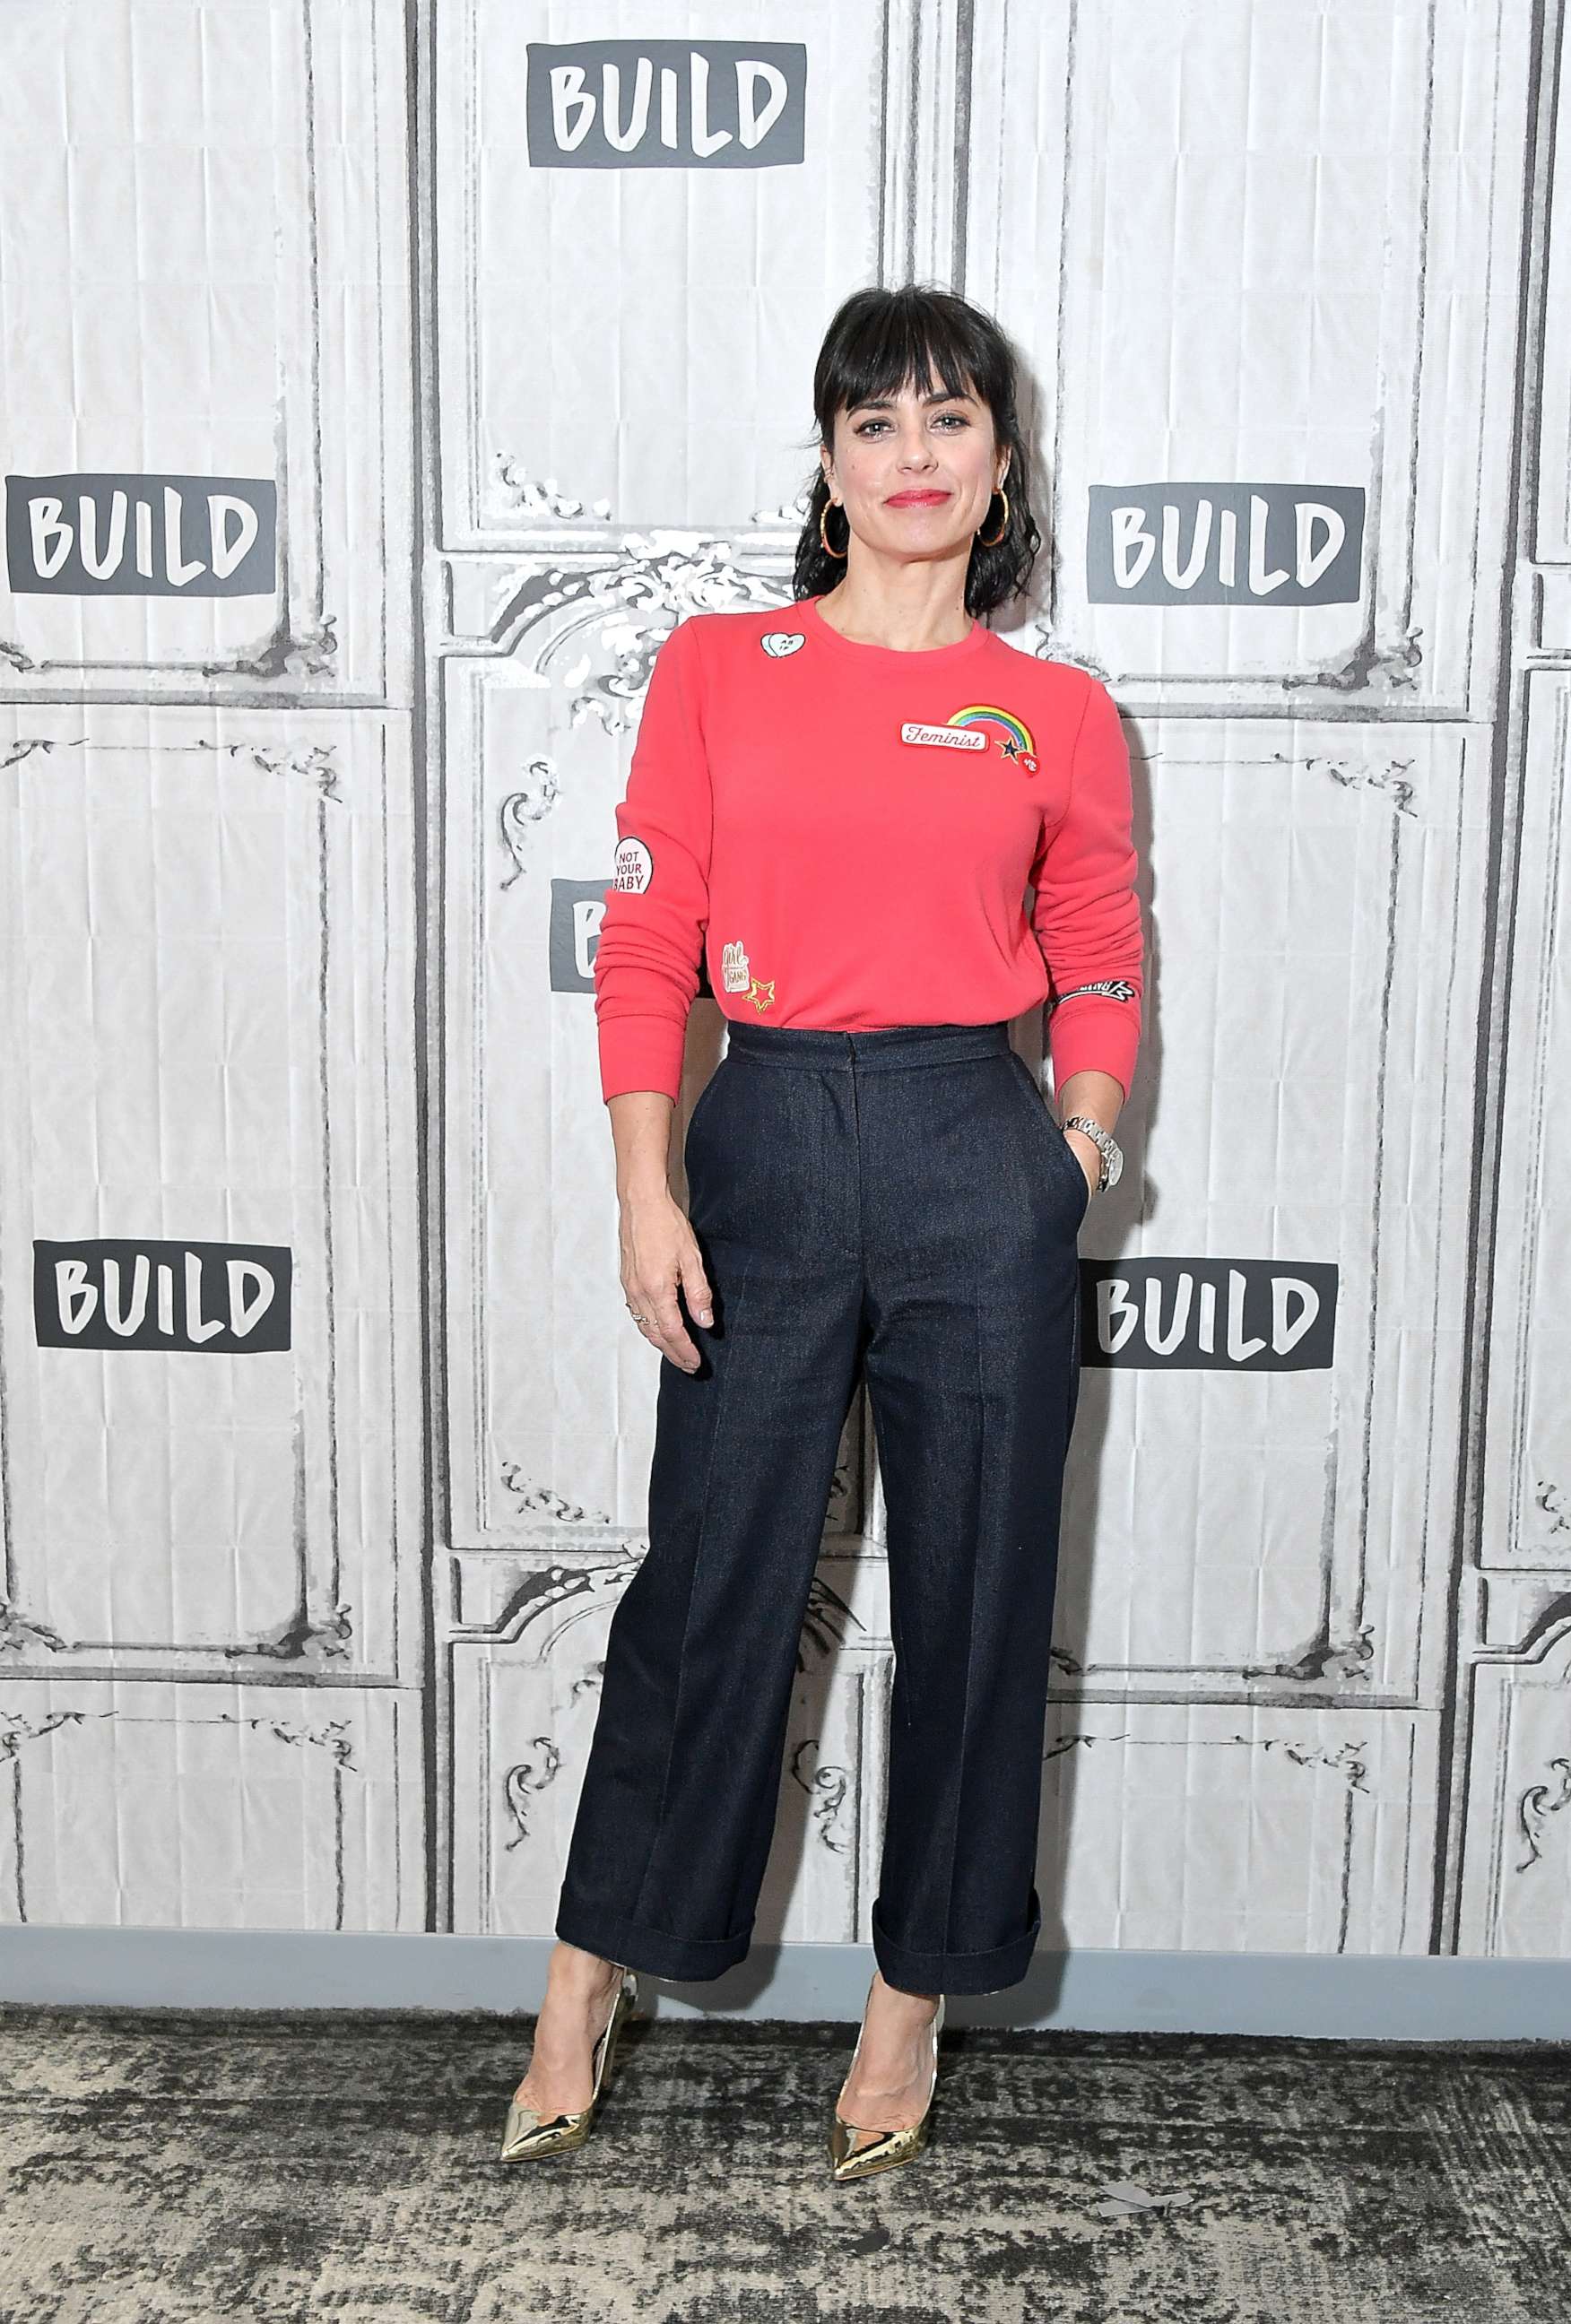 PHOTO: Actress Constance Zimmer visits Build Studio to discuss the show "UnREAL" at Build Studio, Feb. 20, 2018, in New York City.